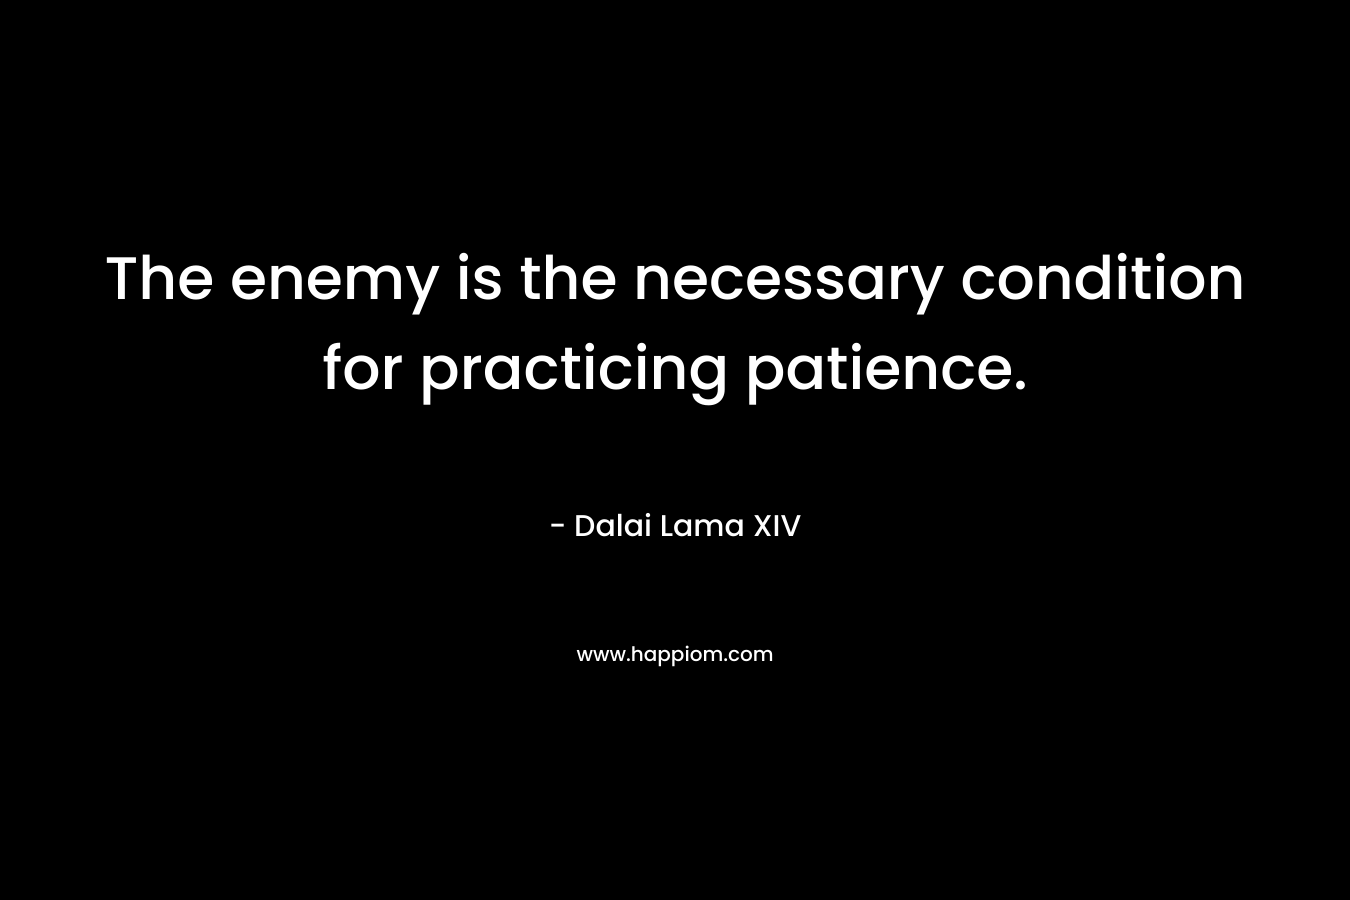 The enemy is the necessary condition for practicing patience. – Dalai Lama XIV